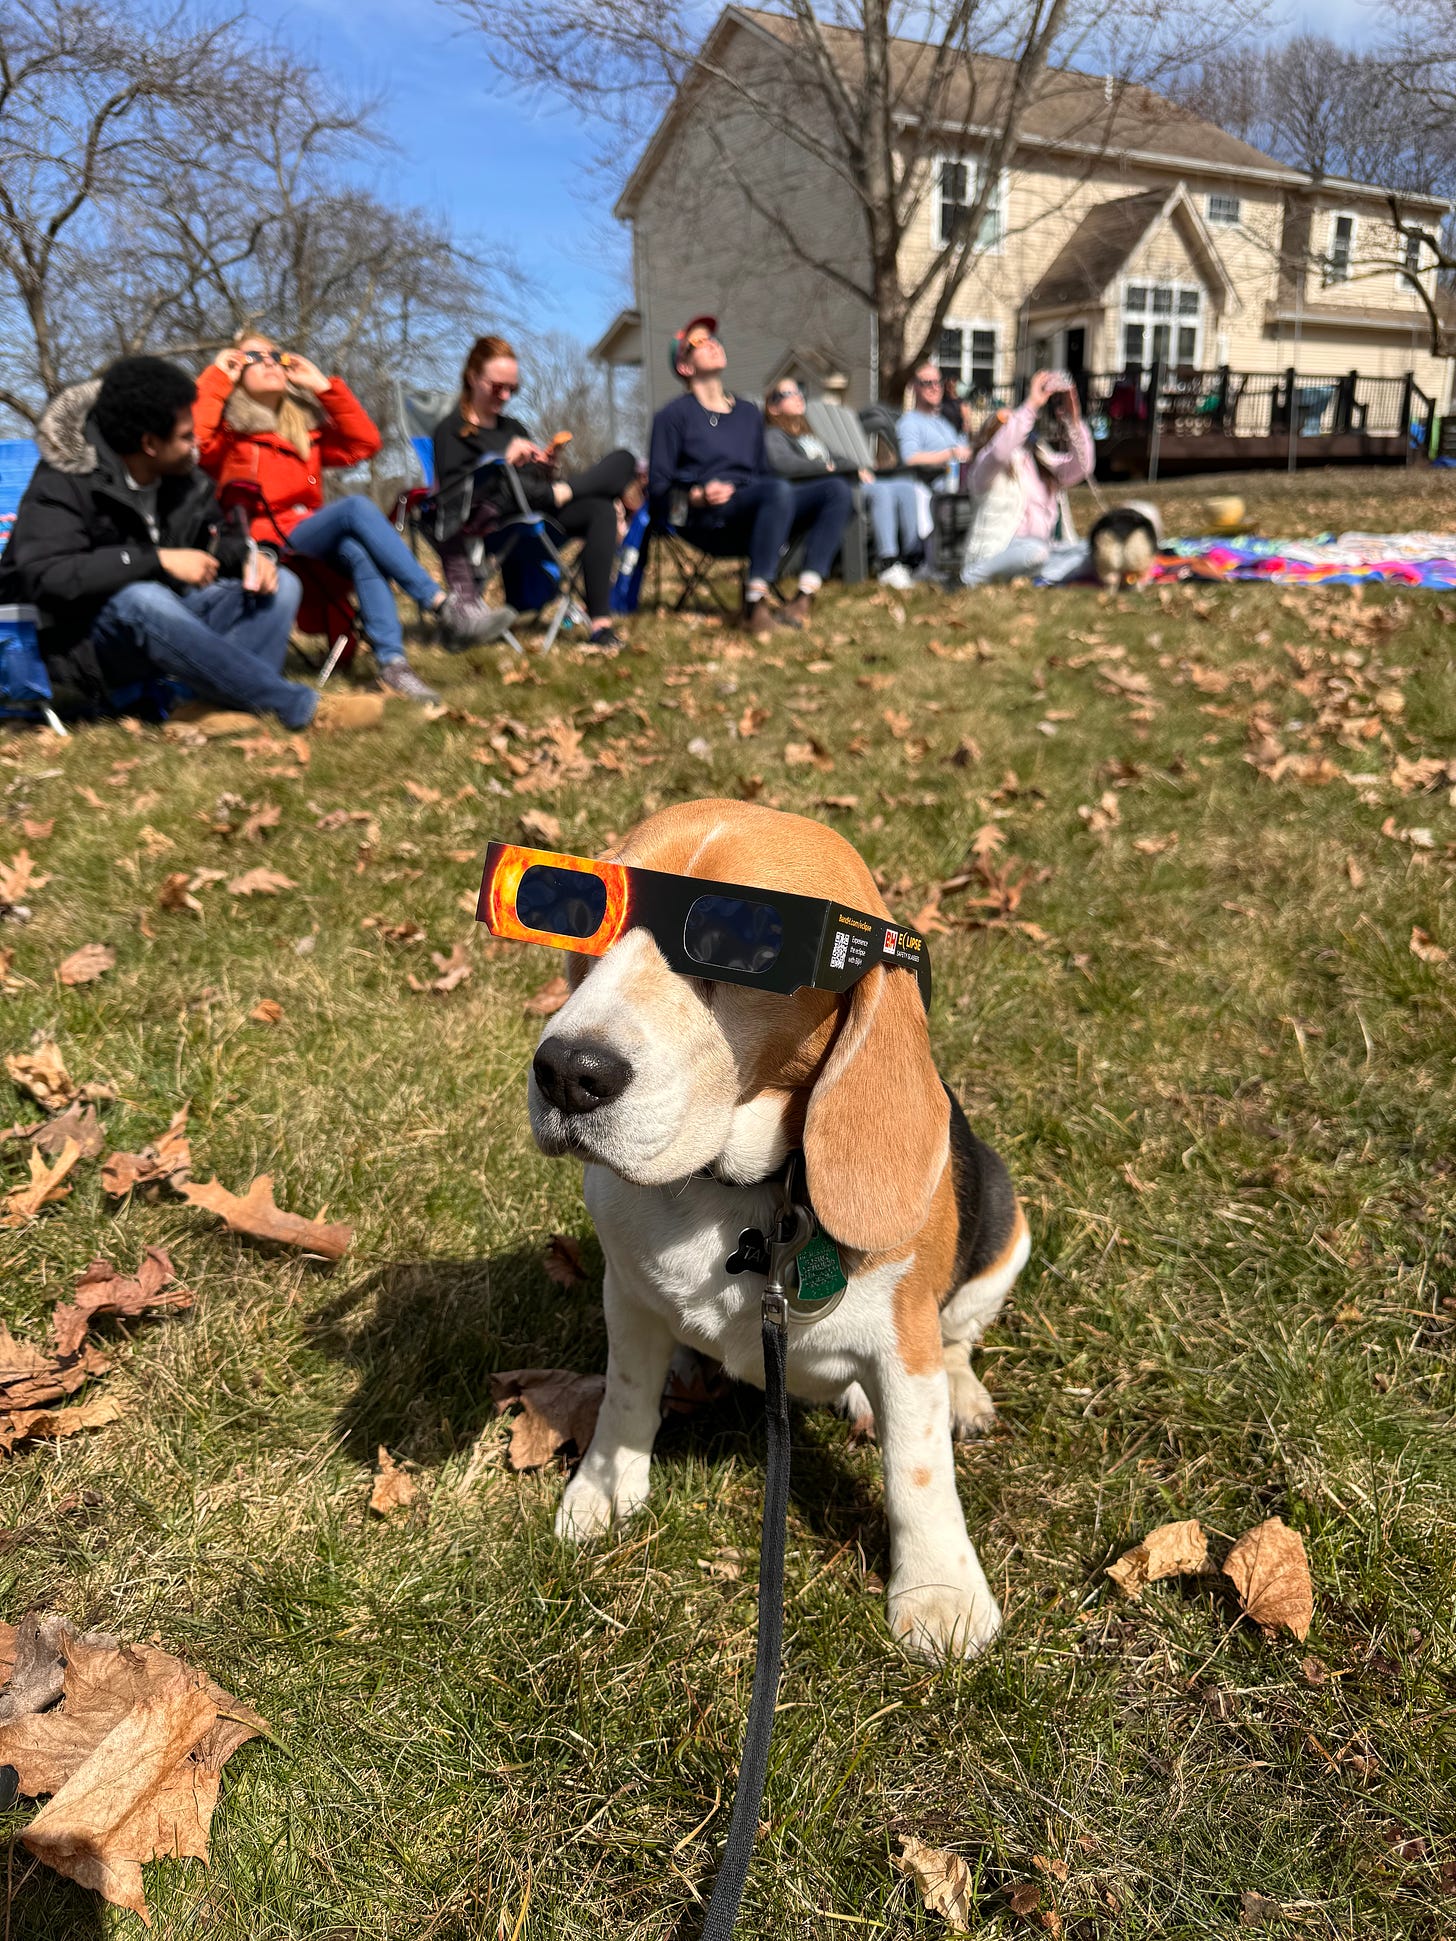 A beagle sits in the middle of a grassy lawn, a pair of giant eclipse glasses on her face. Assorted people sit behind her on the grass, some of them chatting, others looking up at the sky with their own eclipse glasses.